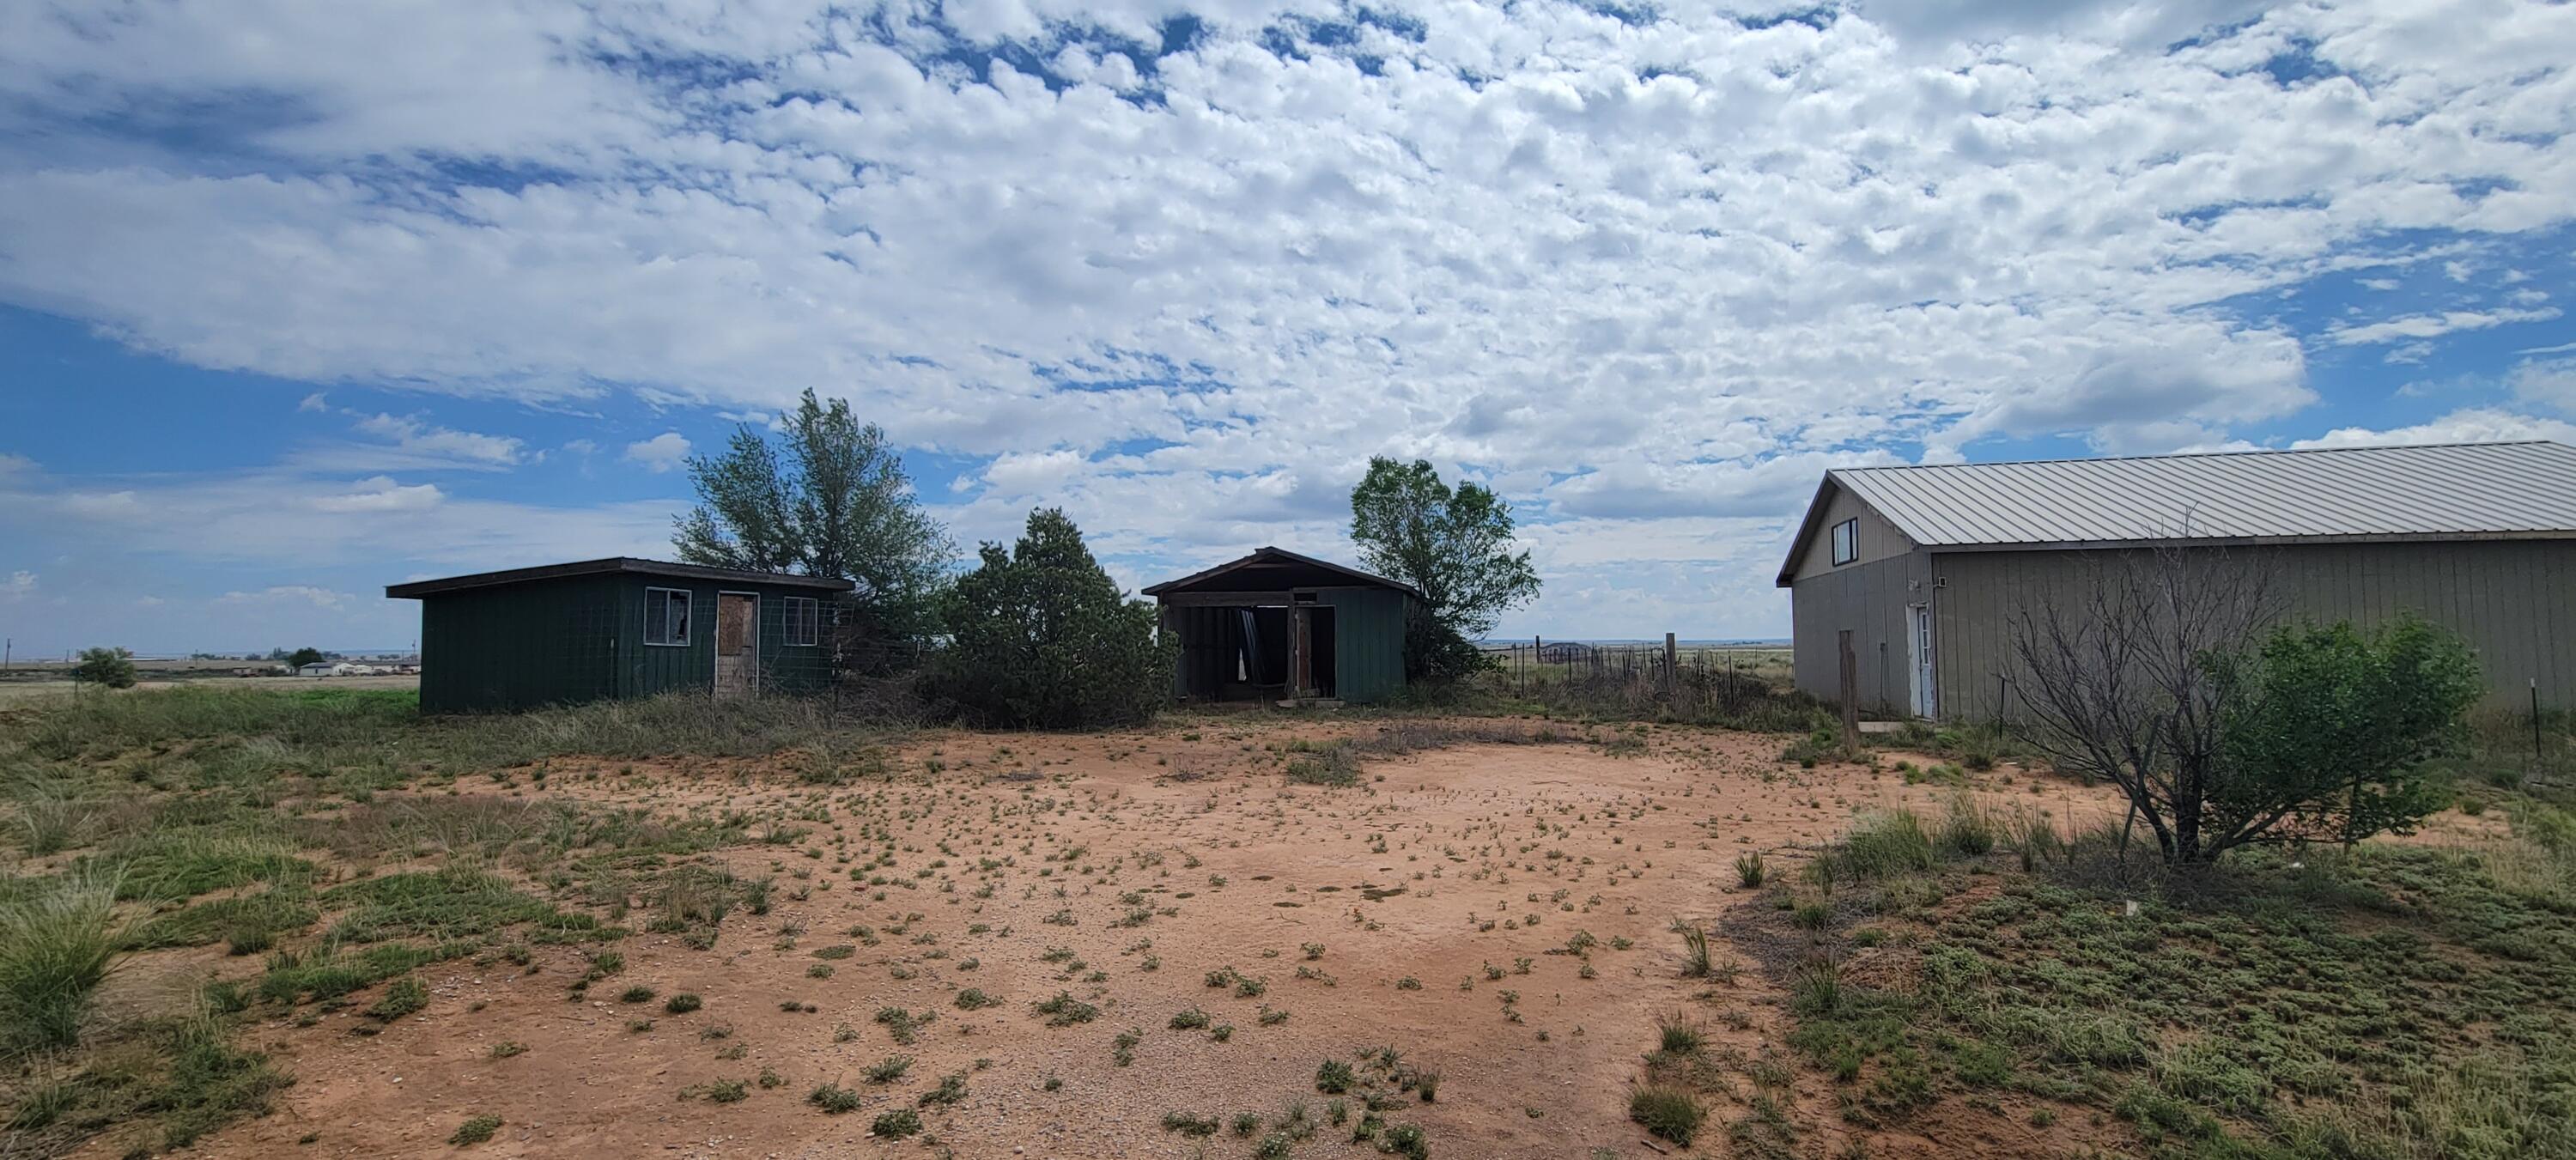 5 Yucca Lane, Moriarty, New Mexico 87035, ,Land,For Sale,5 Yucca Lane,1035323